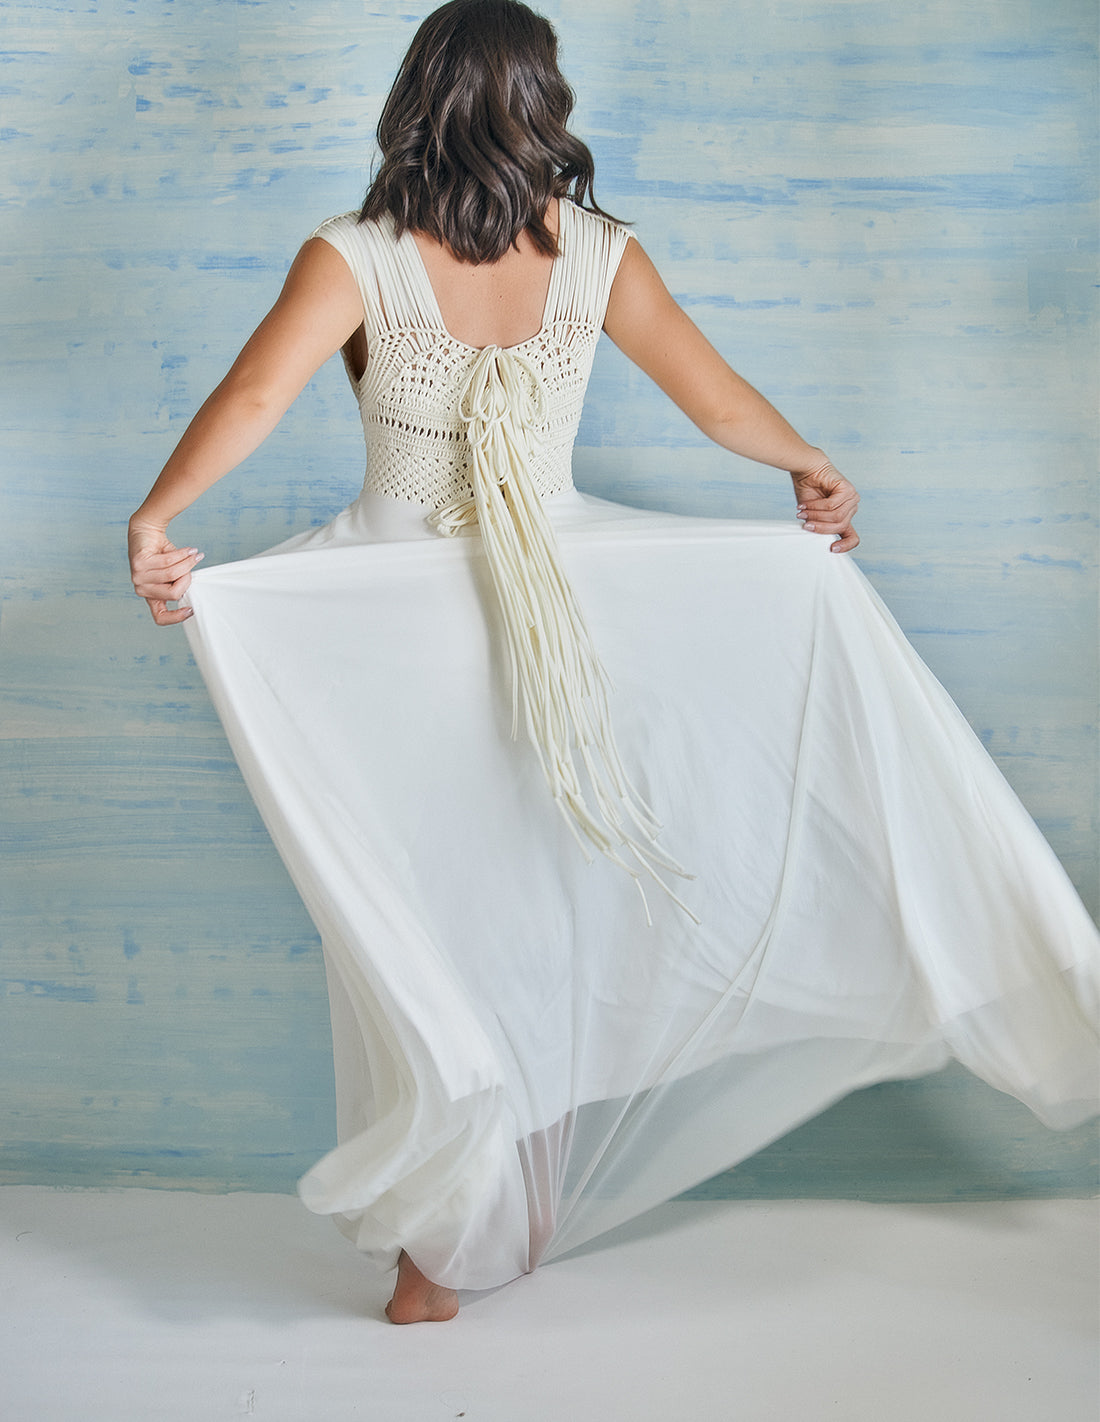 Papirus Dress Ivory. Dress With Hand Woven Macramé In Ivory. Entreaguas